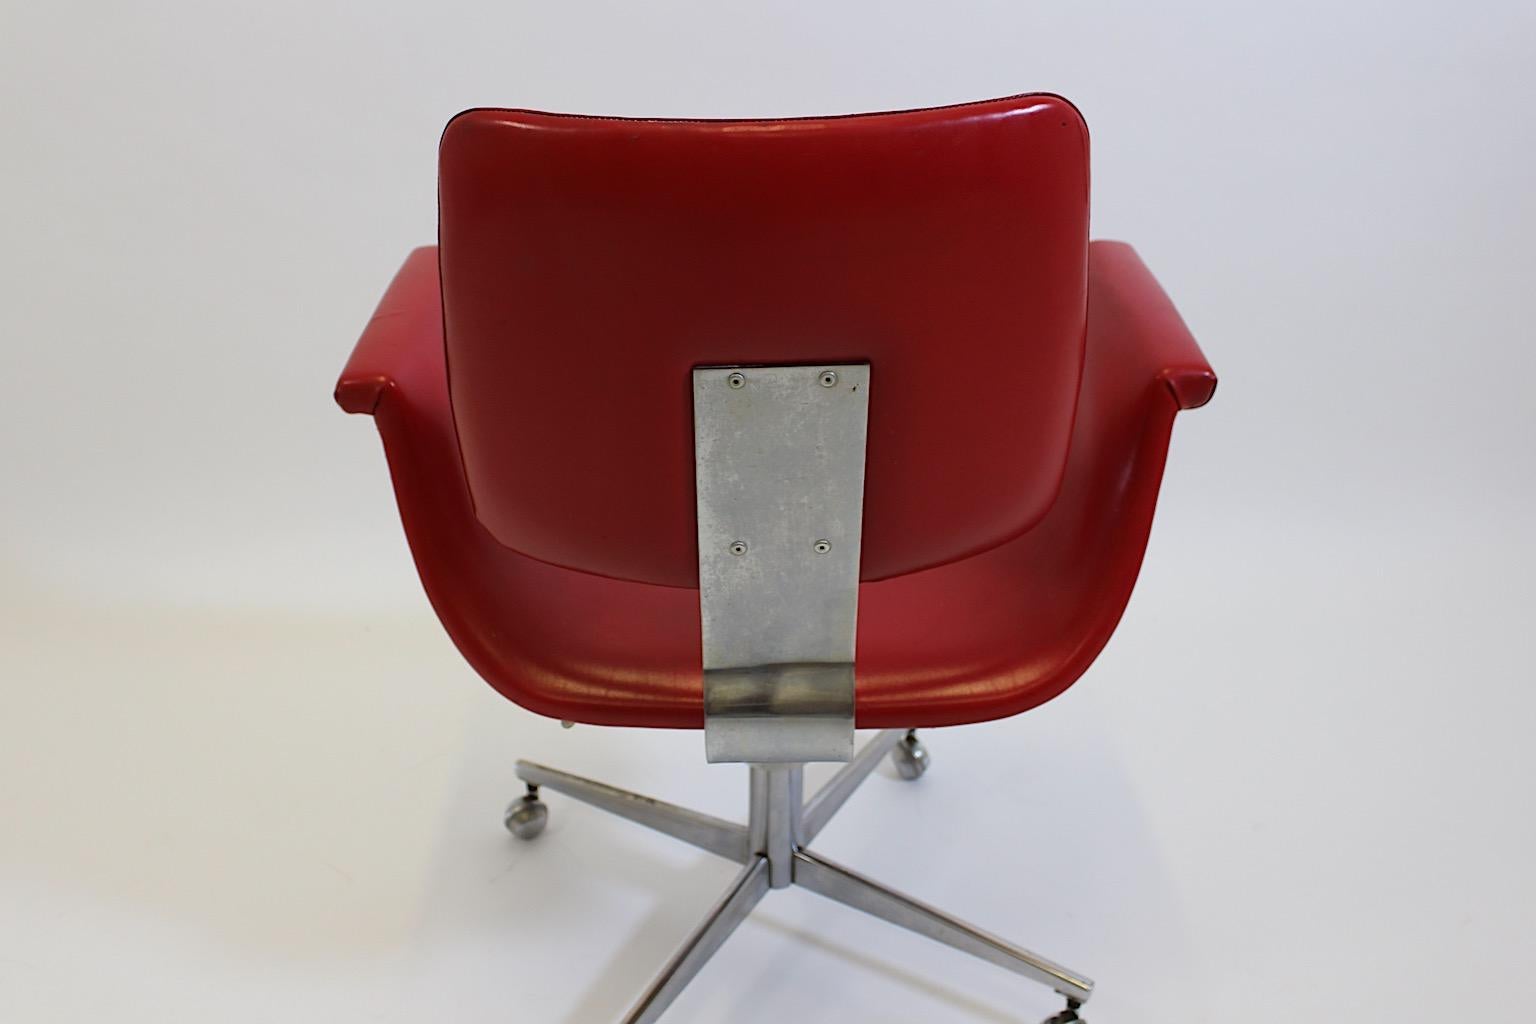 Space Age Vintage Red Faux Leather Chrome Metal Office Chair Desk Chair 1960s For Sale 9